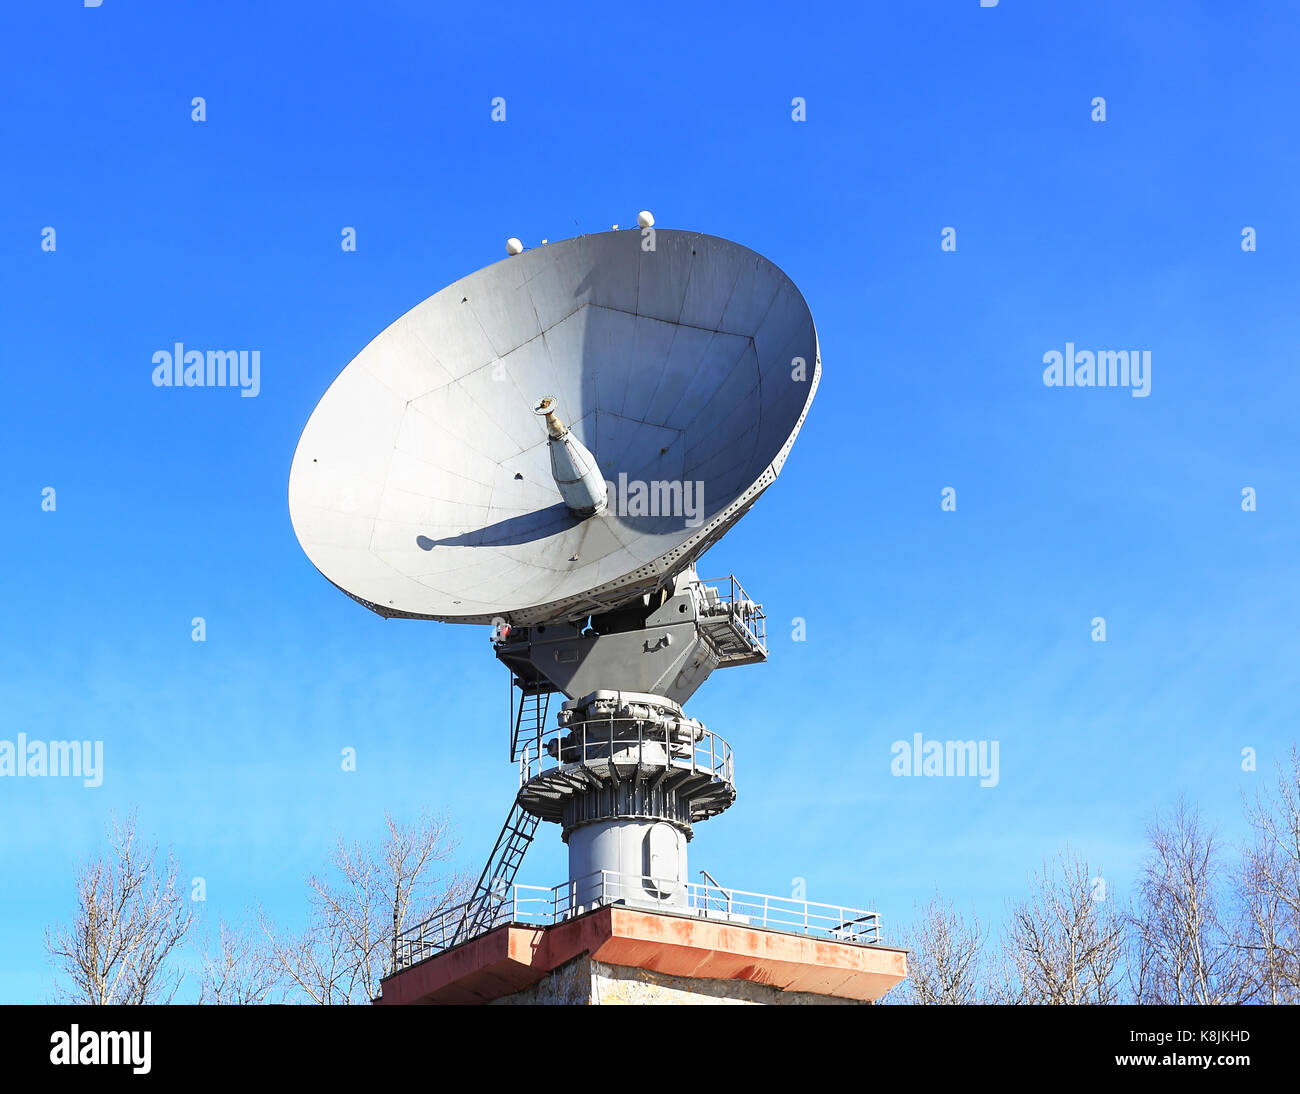 Dish antenna for the satellite communication with a metallic reflex reflector on the roof of the building Stock Photo